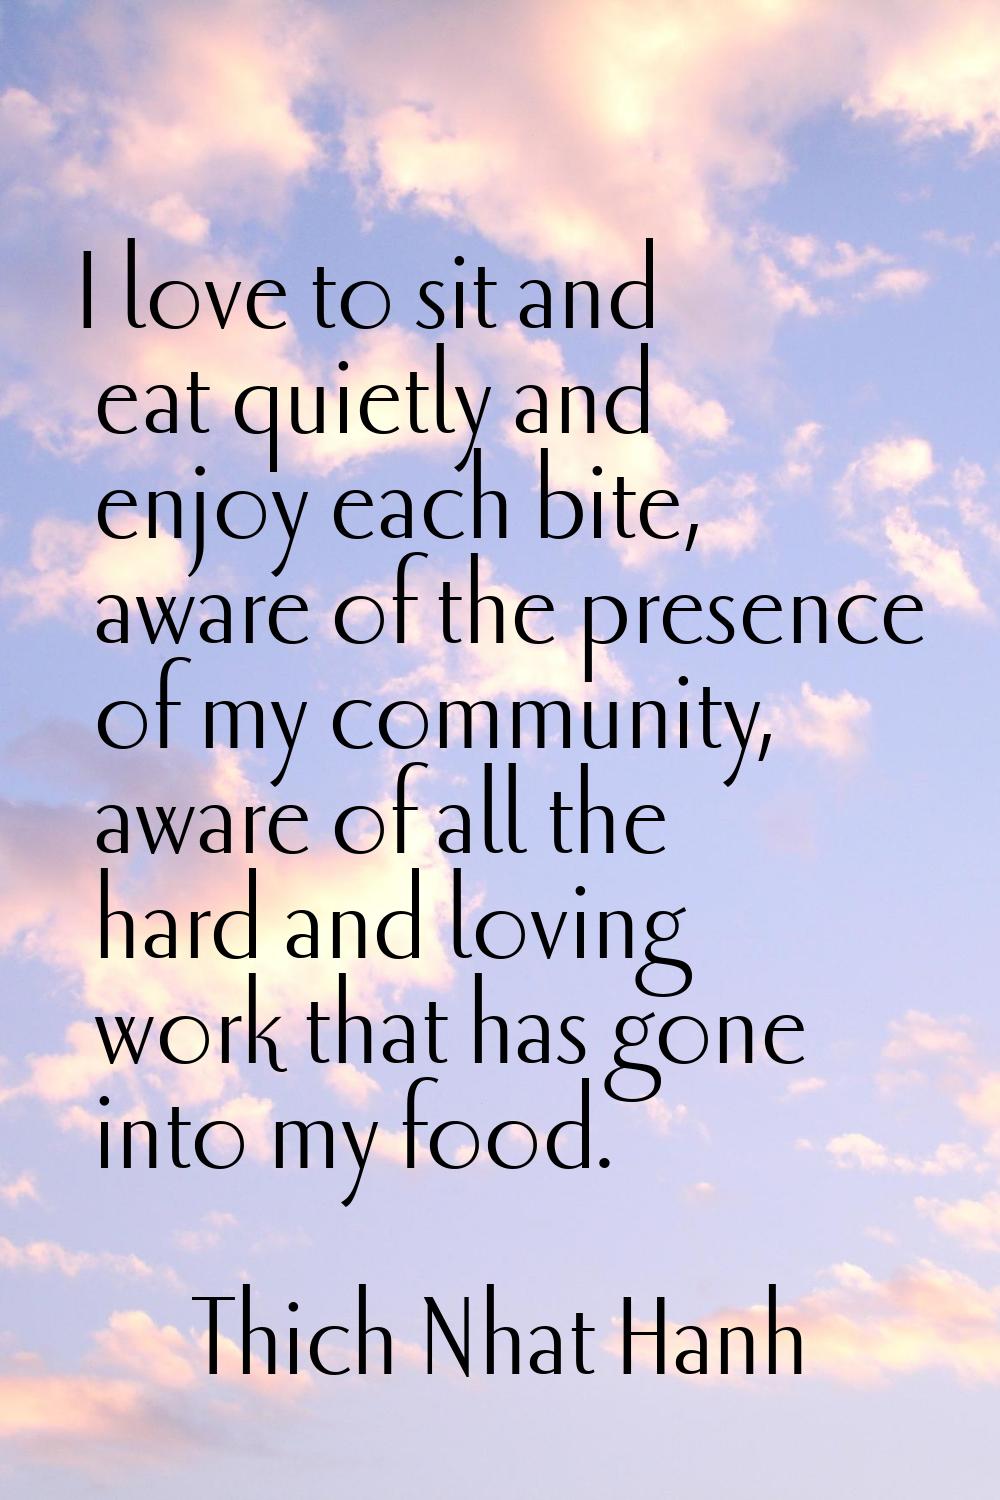 I love to sit and eat quietly and enjoy each bite, aware of the presence of my community, aware of 